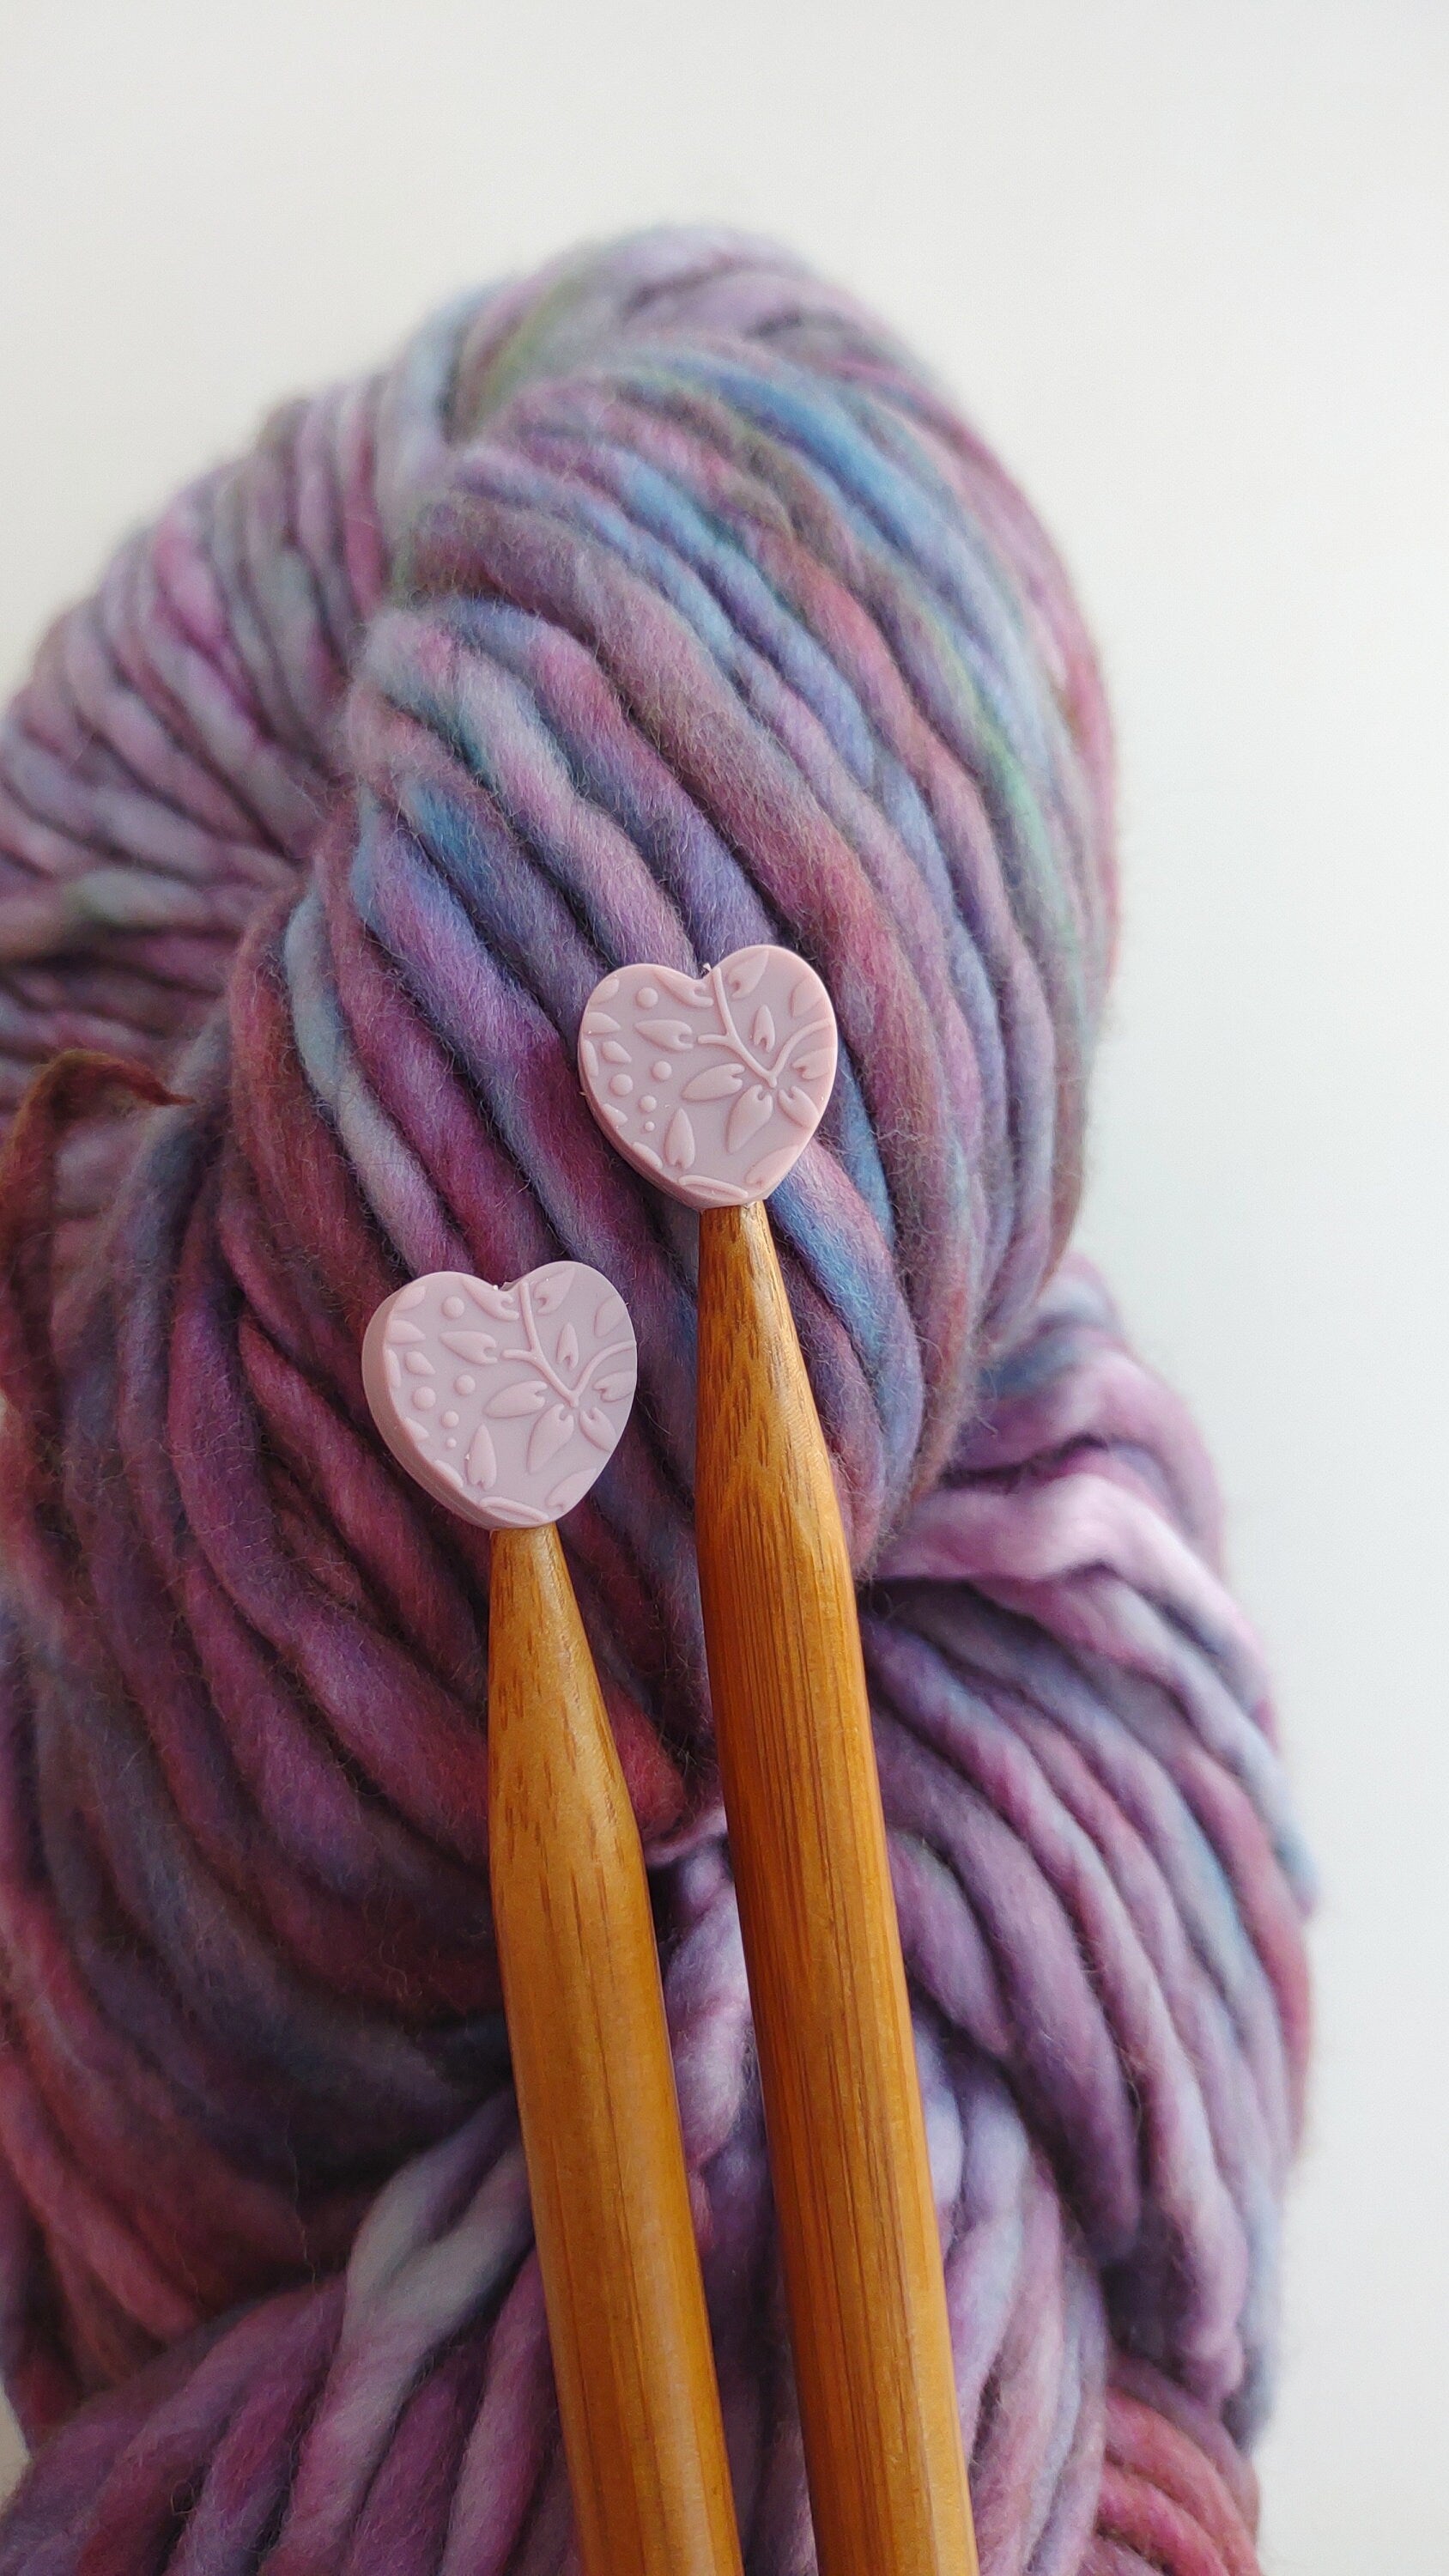 Mauve Embossed Heart Knitting Needle Stitch Stoppers. Needle Protectors. Knitting Notions, Accessories, Supplies, Tools.